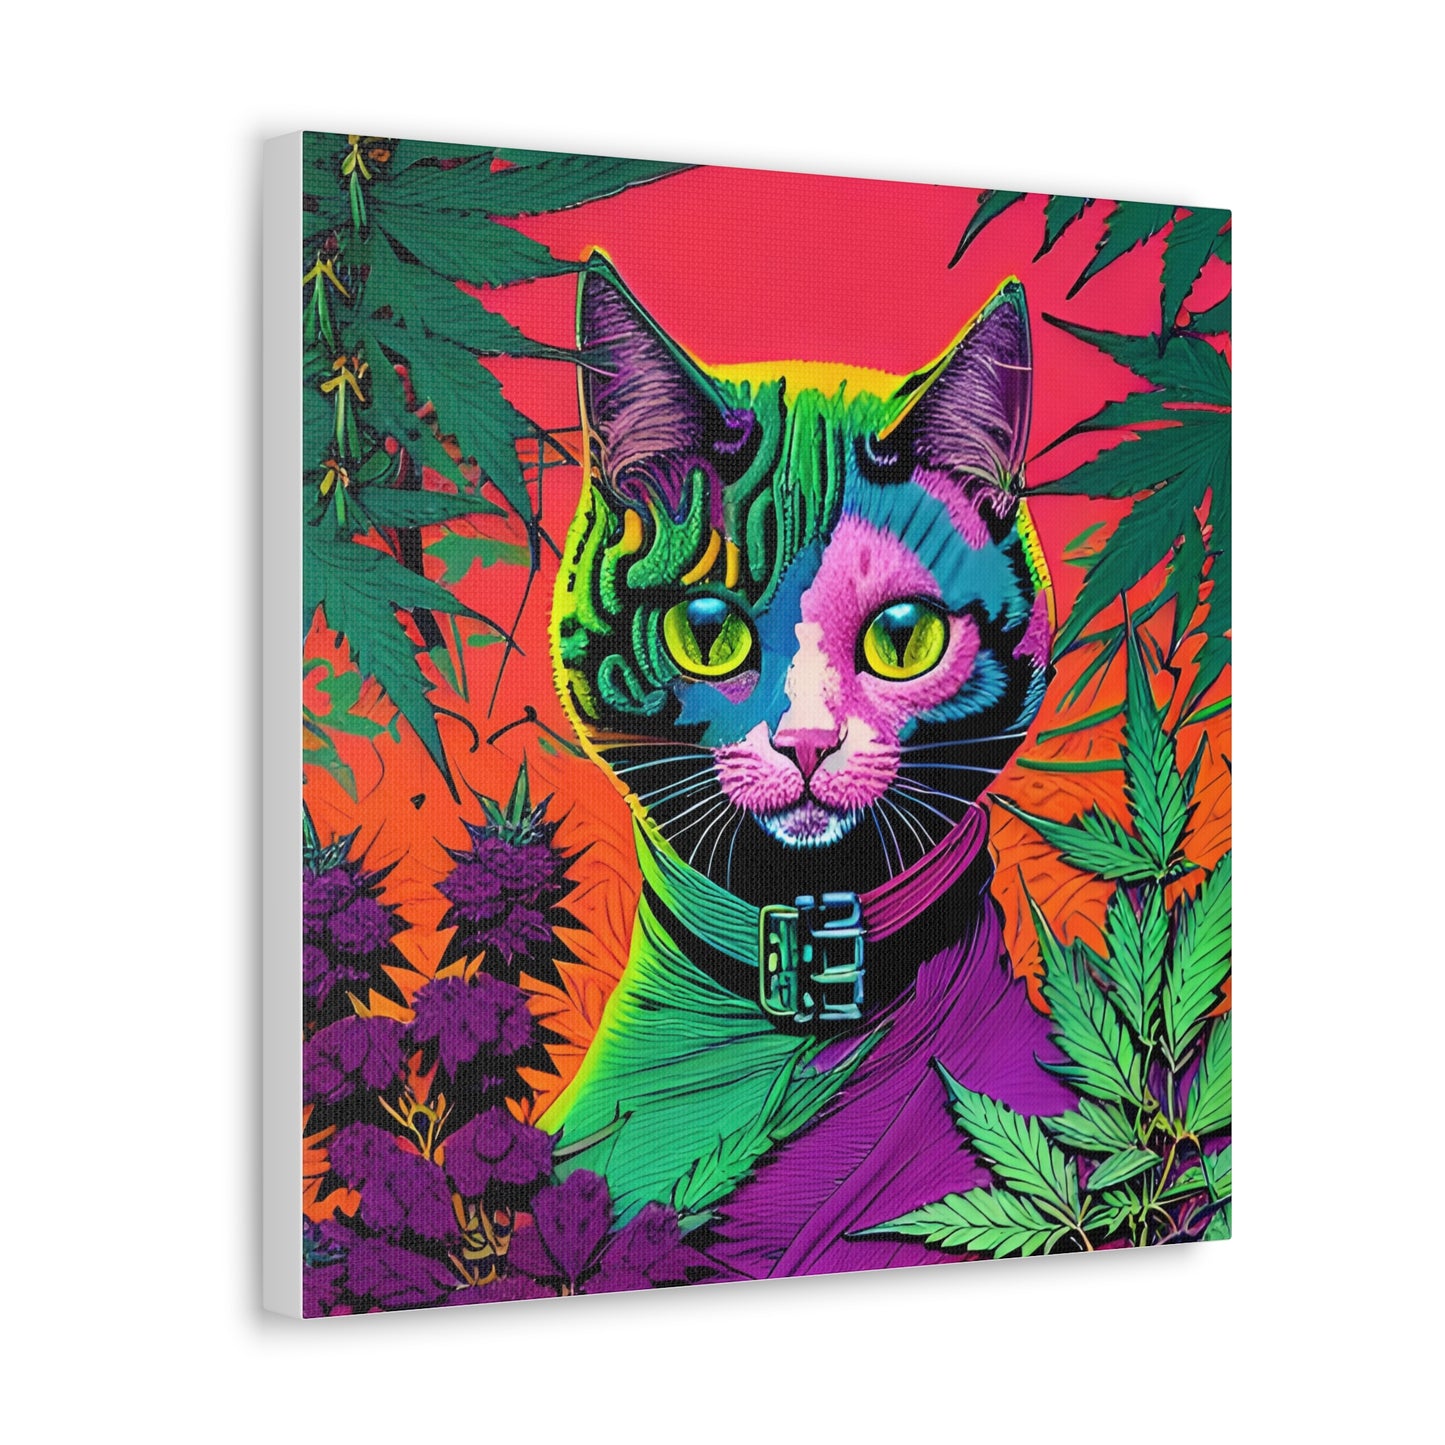 Cannabis Cat Wall Art No. 2 - Square 16" x 16" Canvas Wall Art Gift Print - A Whimsical Delight for Cannabis Enthusiasts!